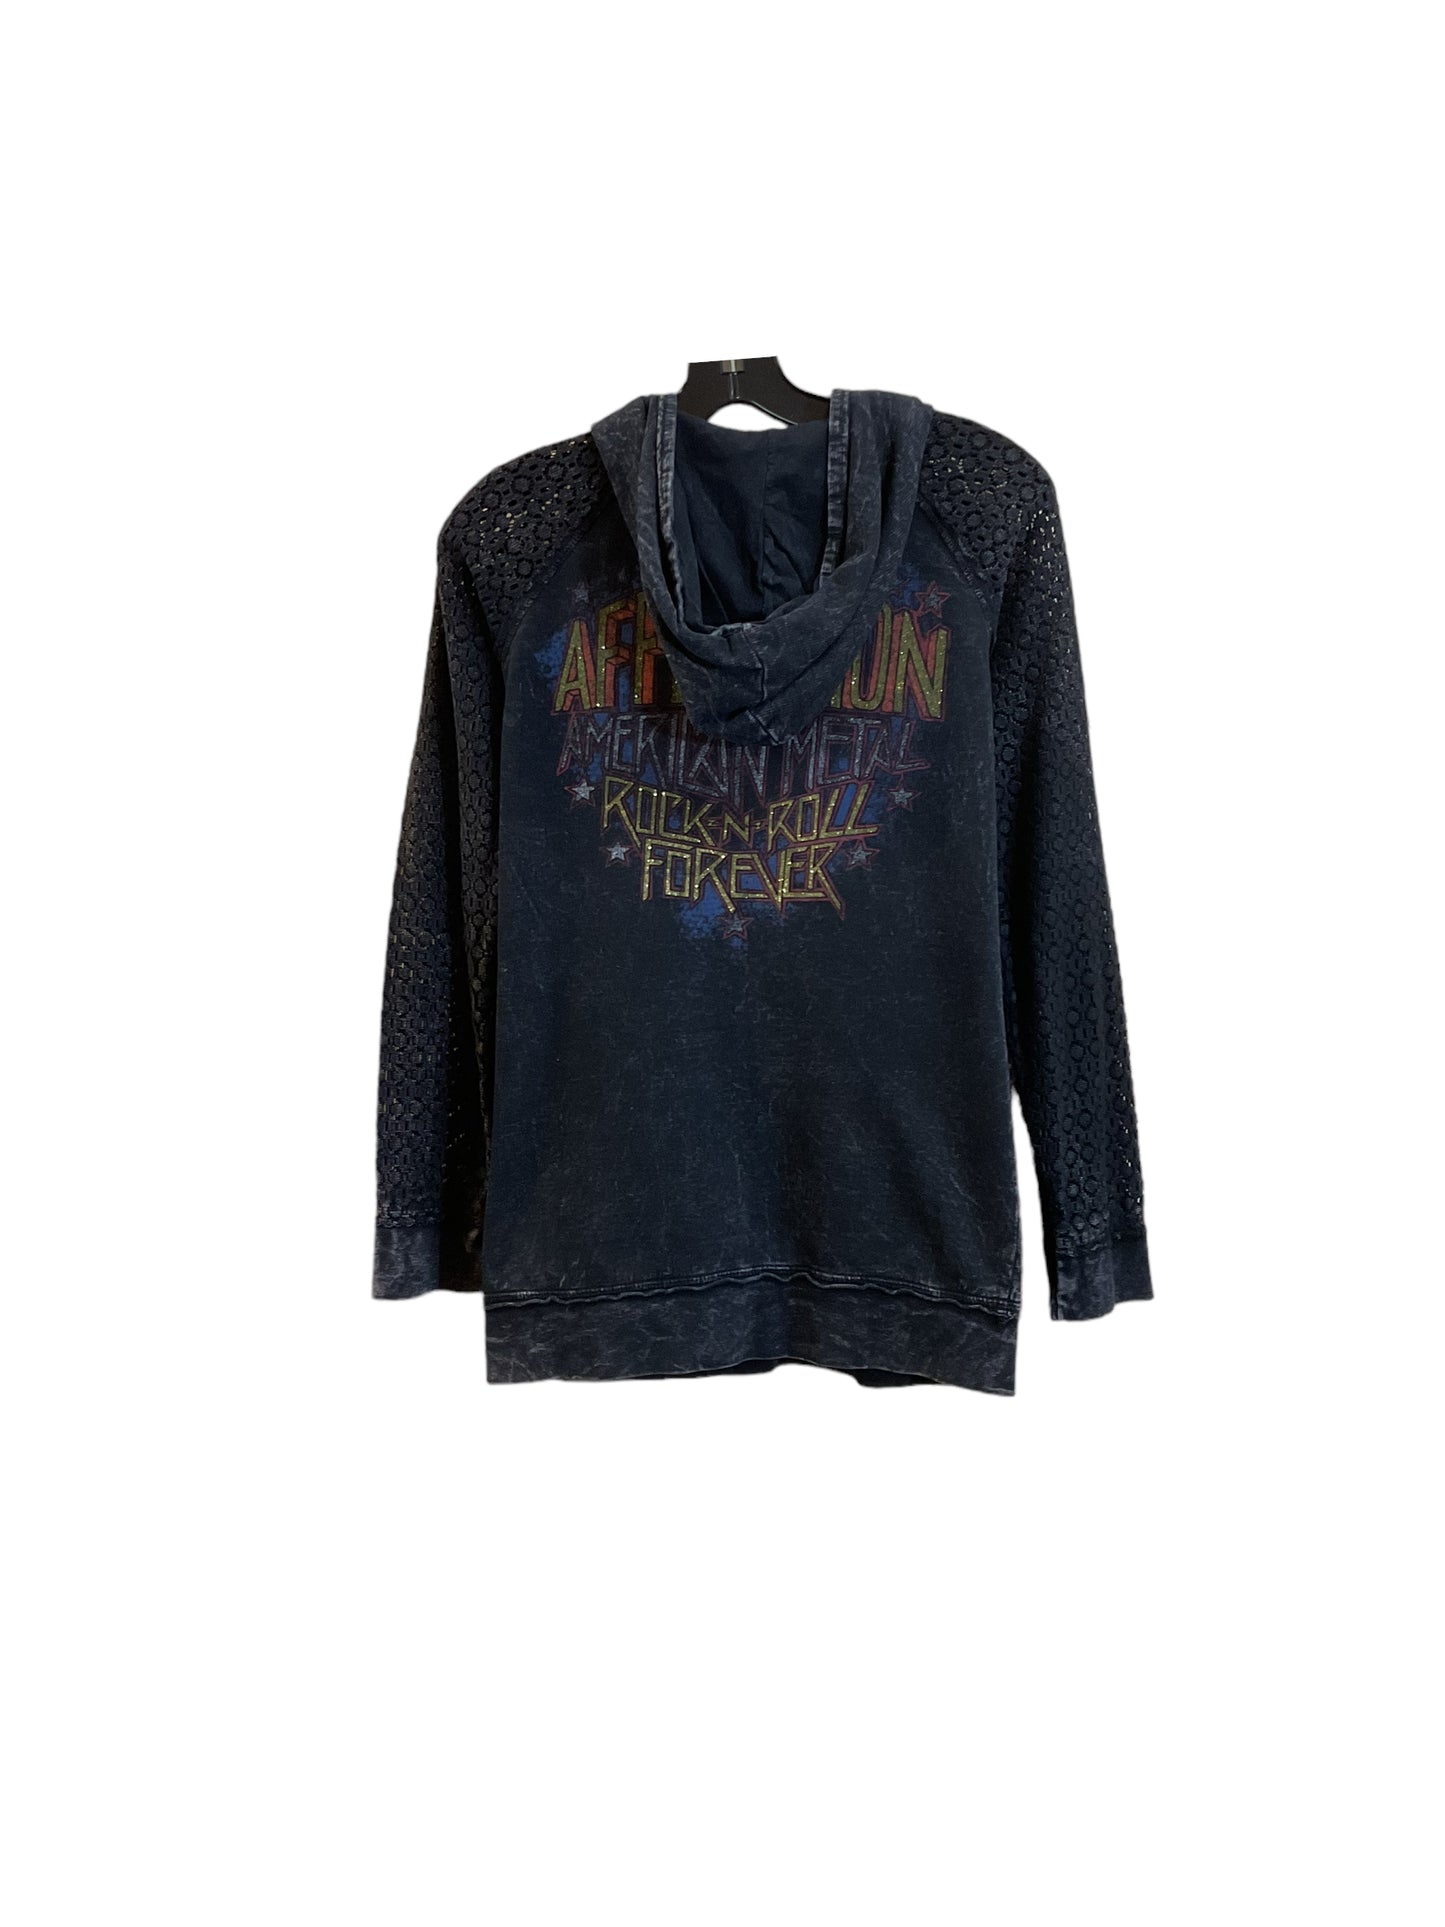 Sweatshirt Hoodie By Affliction  Size: S